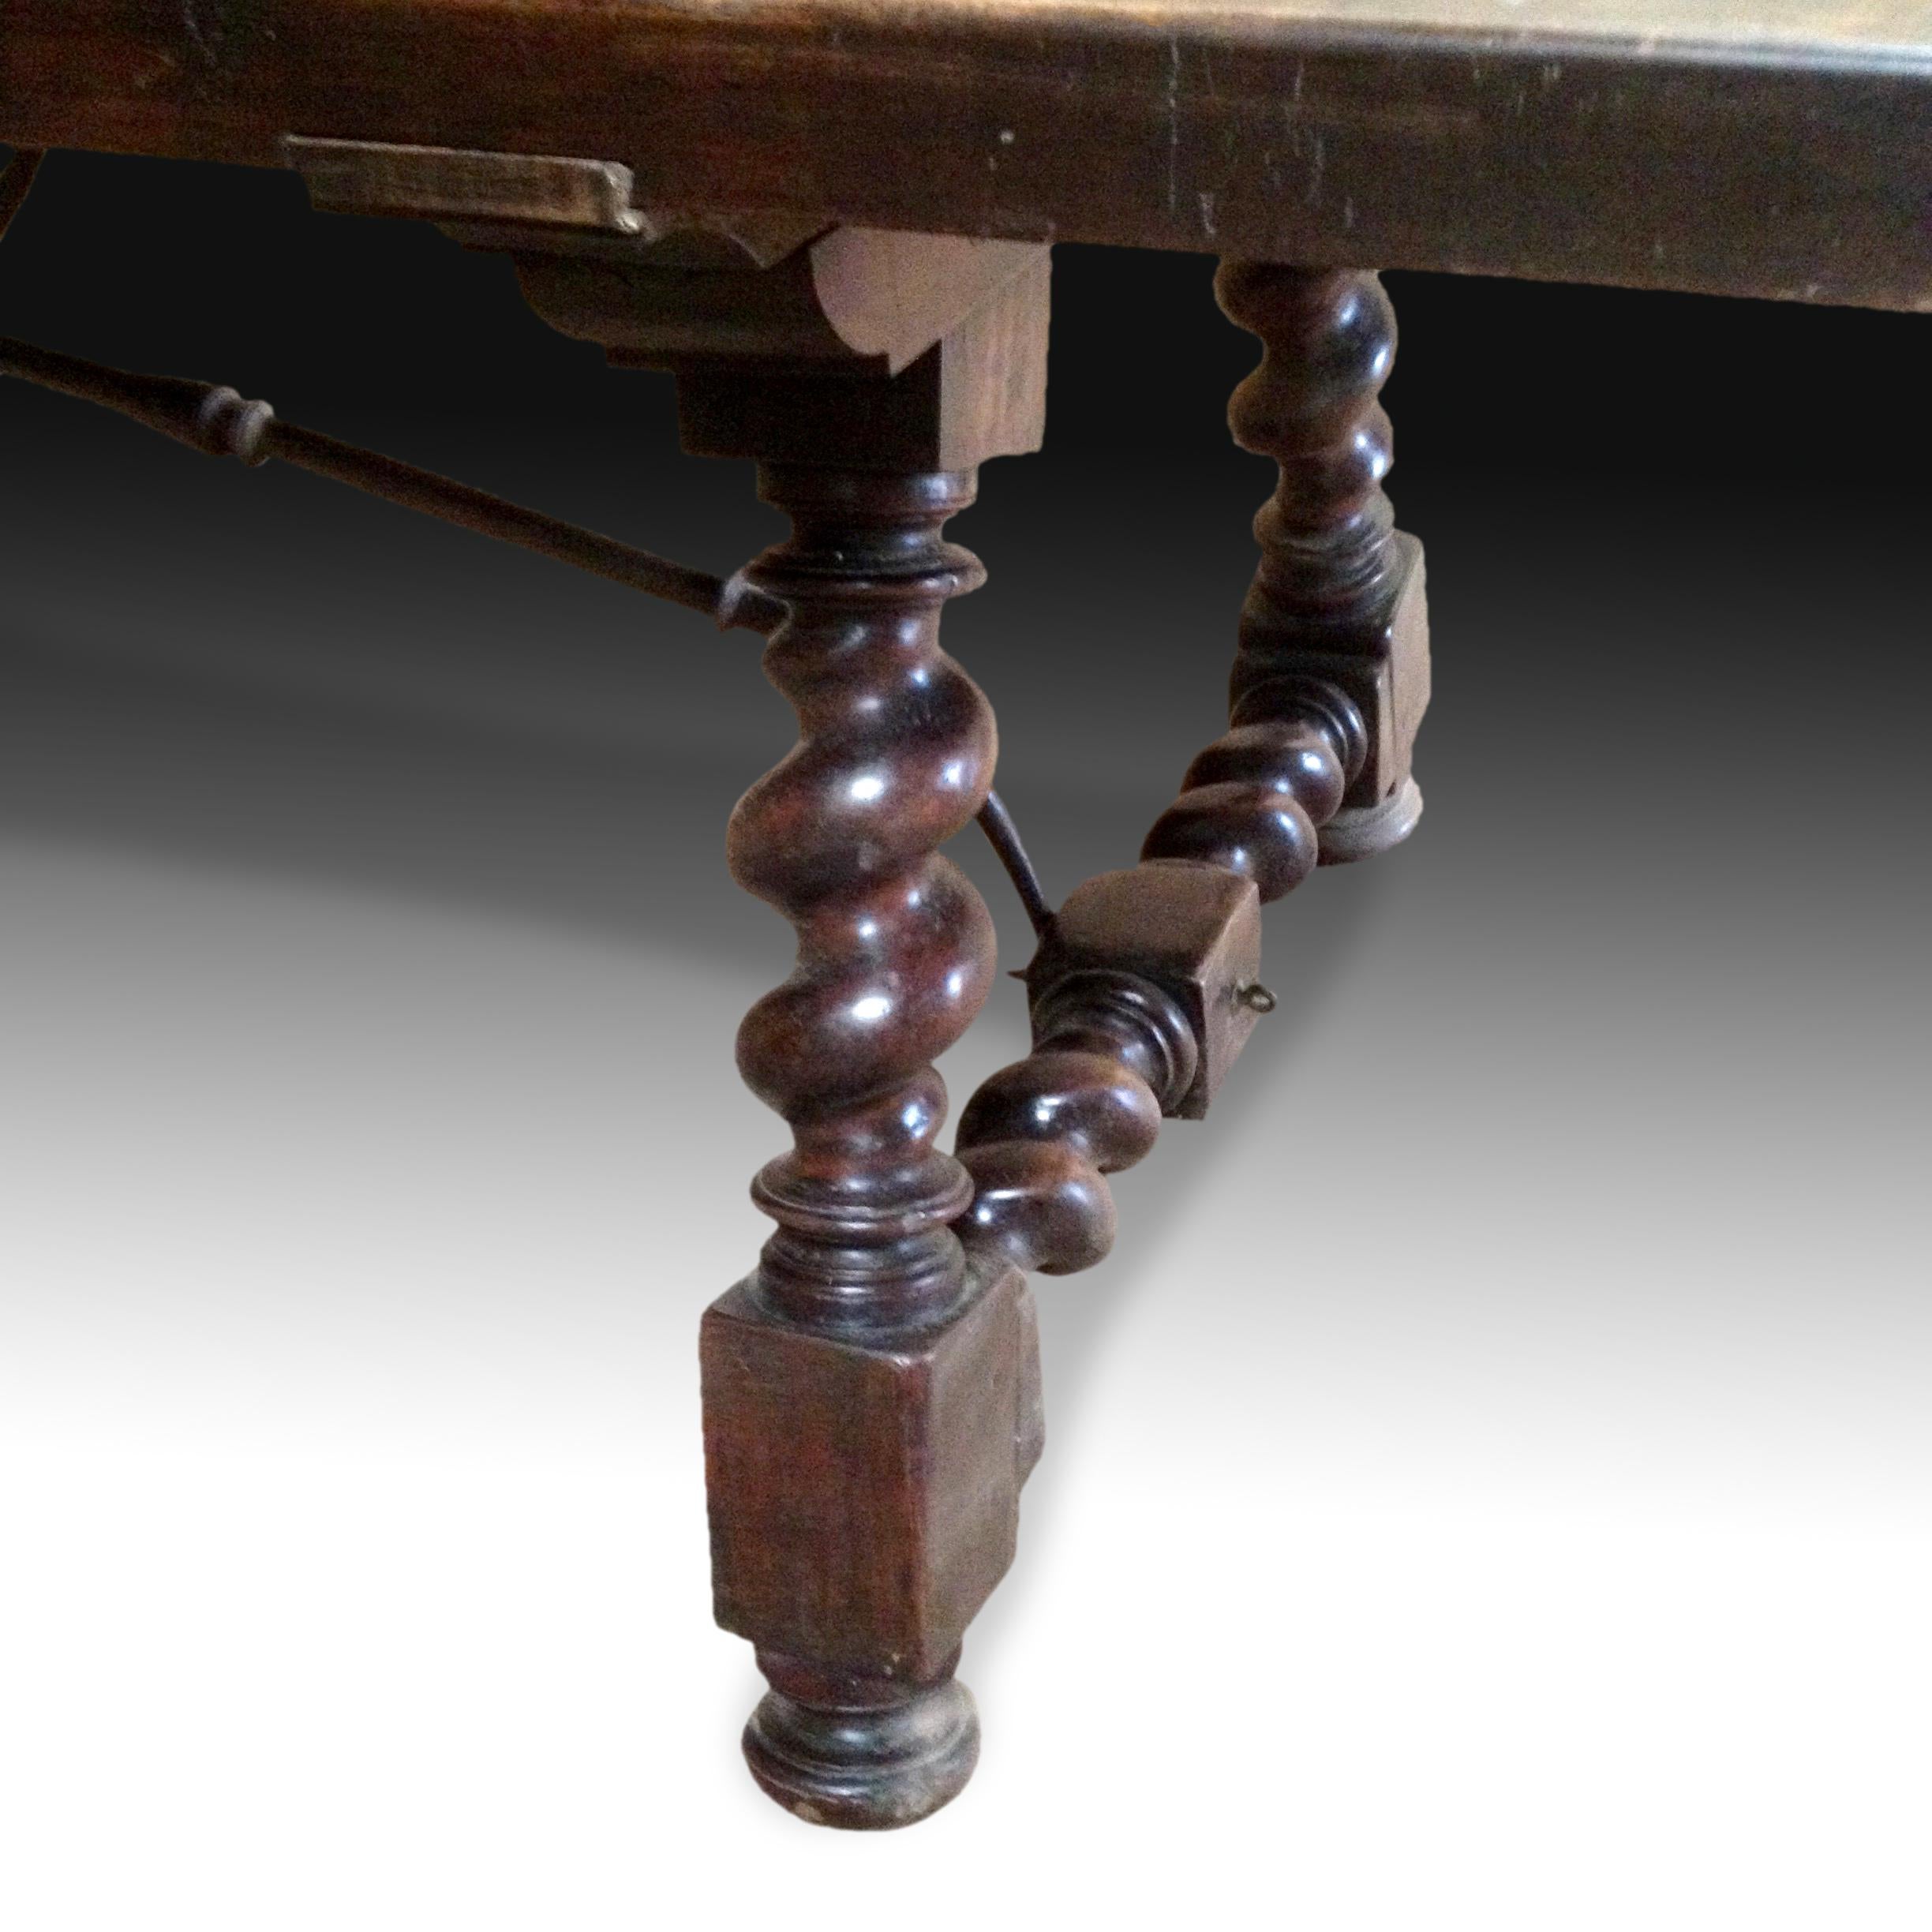 Table with solomonic leg. Walnut wood, metal. 20th century.
Rectangular board table ready made of carved walnut wood with legs and decorated chambranas combining smooth rectangular dice and areas with a Solomonic column shape between discs. The